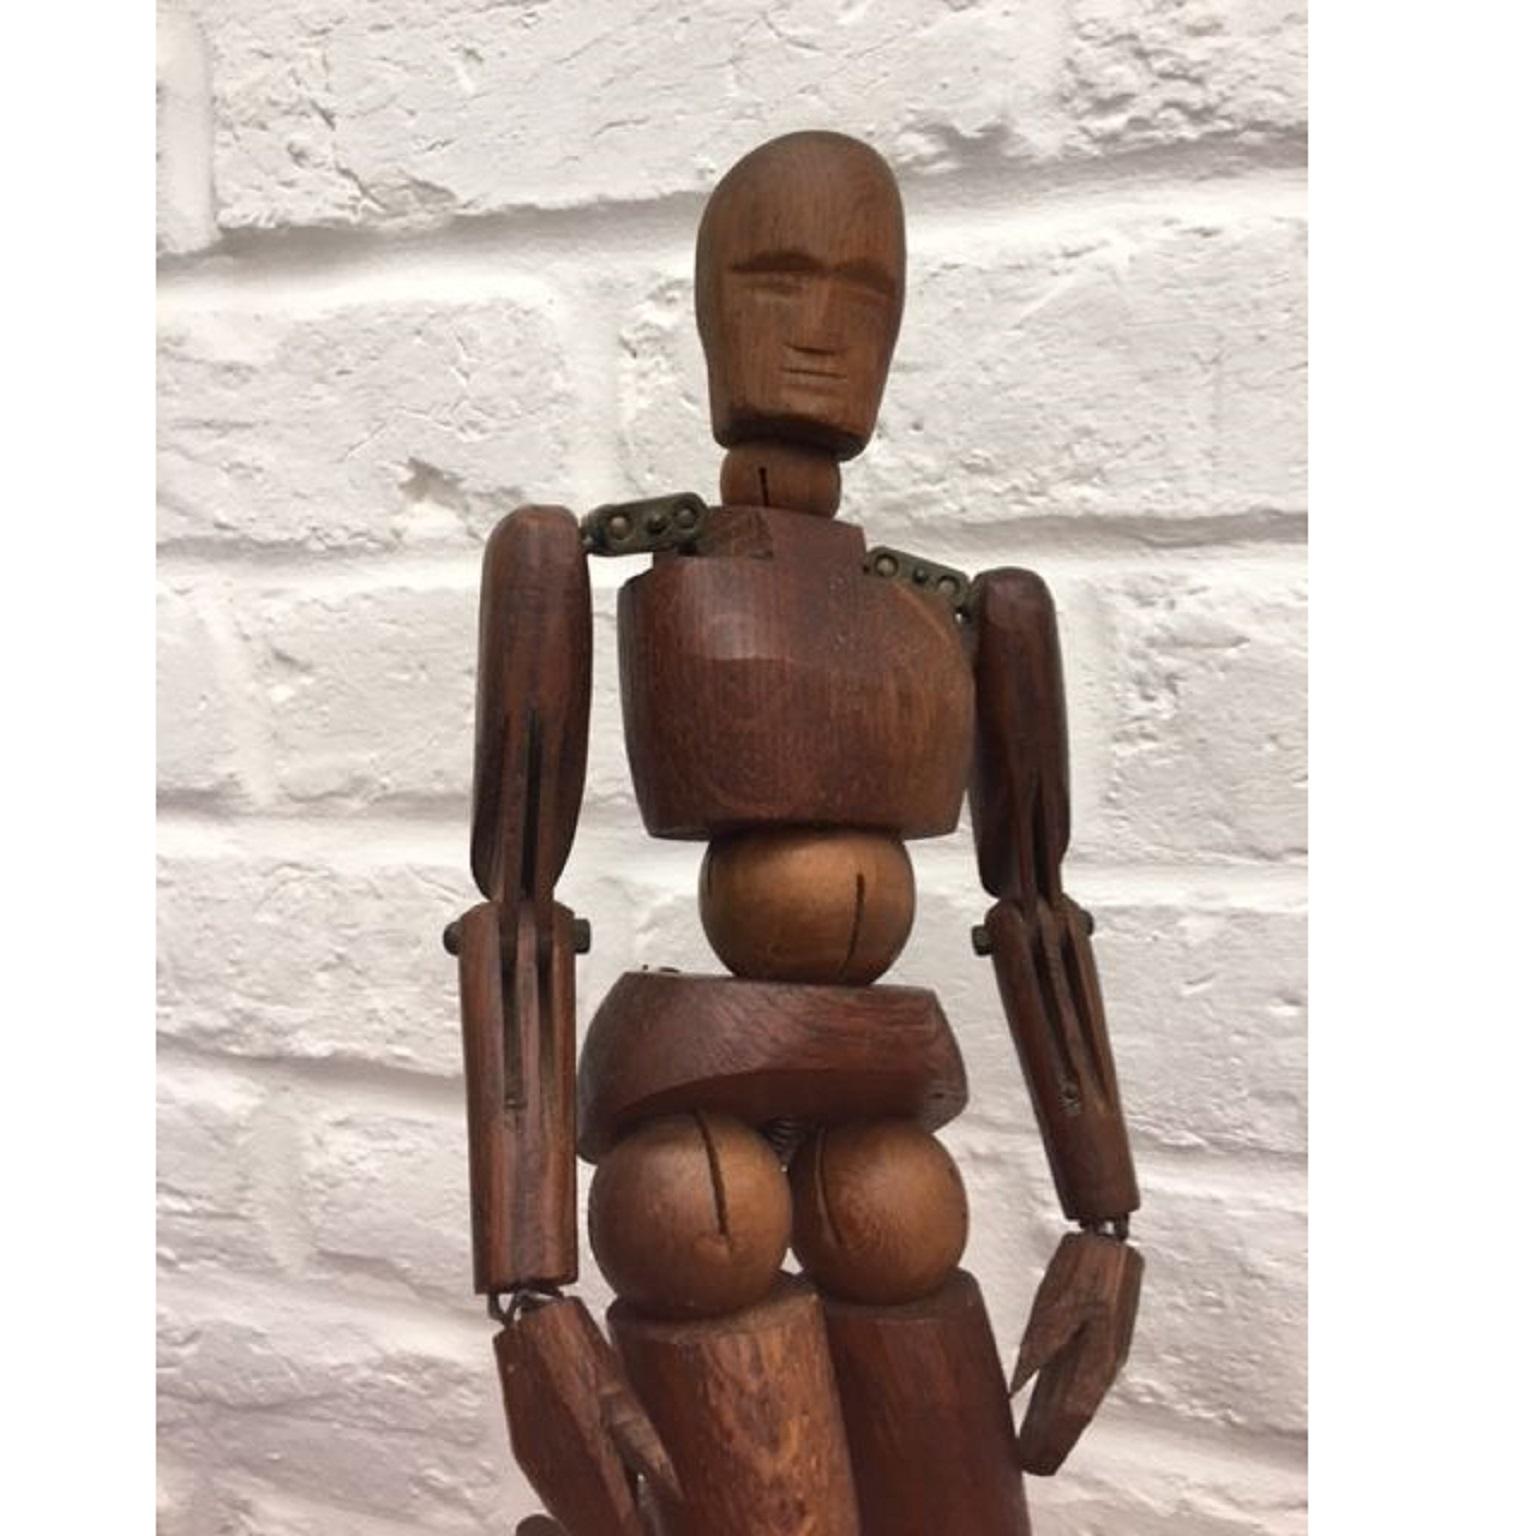 19th century French Articulated Wooden Artists Lay Figure, Mannequin on stand
 
Stunning wooden articulated lay figure from the 19th century in original condition. This item features metal pins, bolts and sprung joints. The figure is attached to a